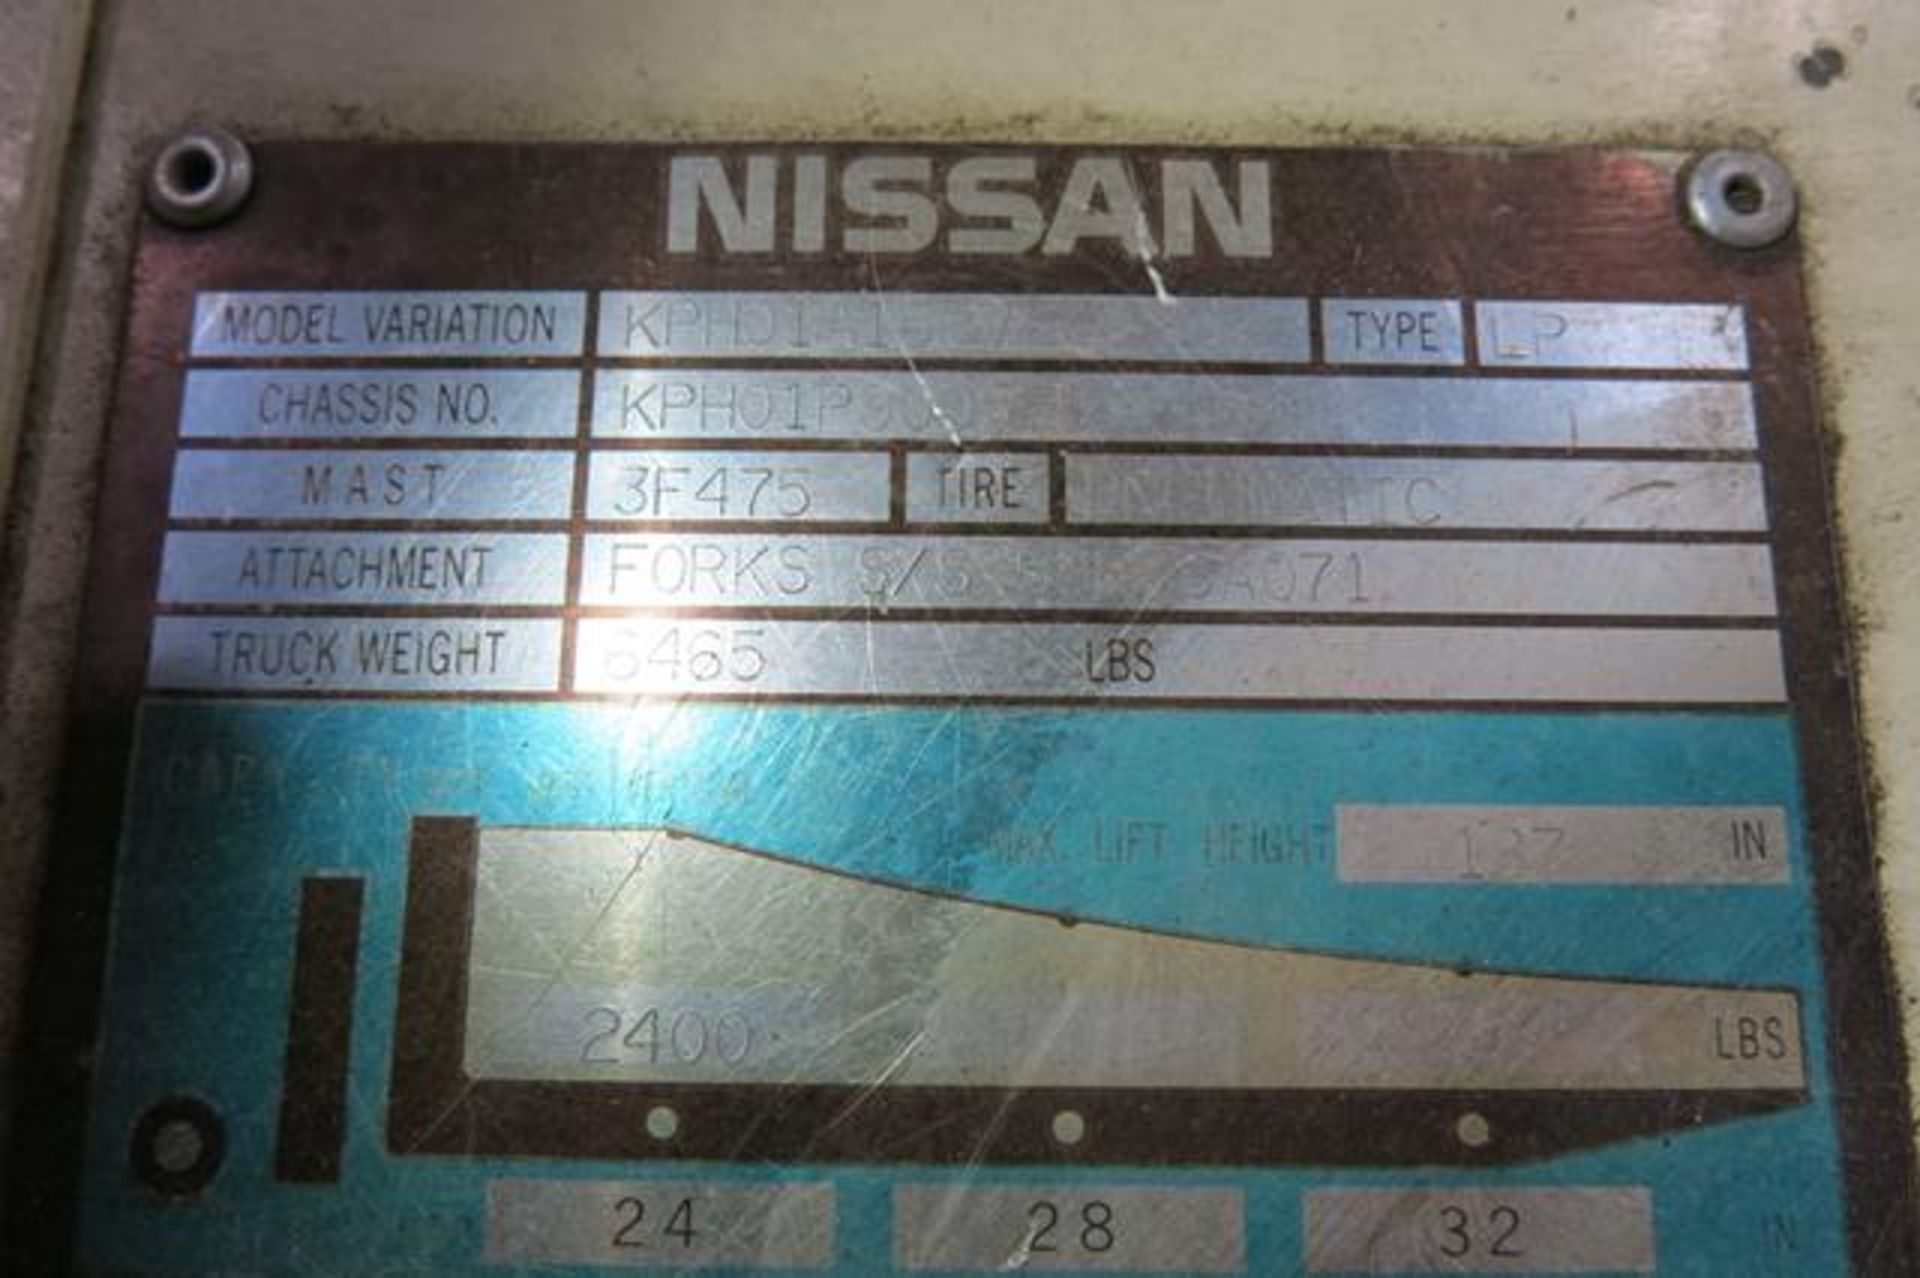 NISSAN, KPH01A15PV, 2,400 LBS, 3 STAGE, LPG FORKLIFT - Image 11 of 11